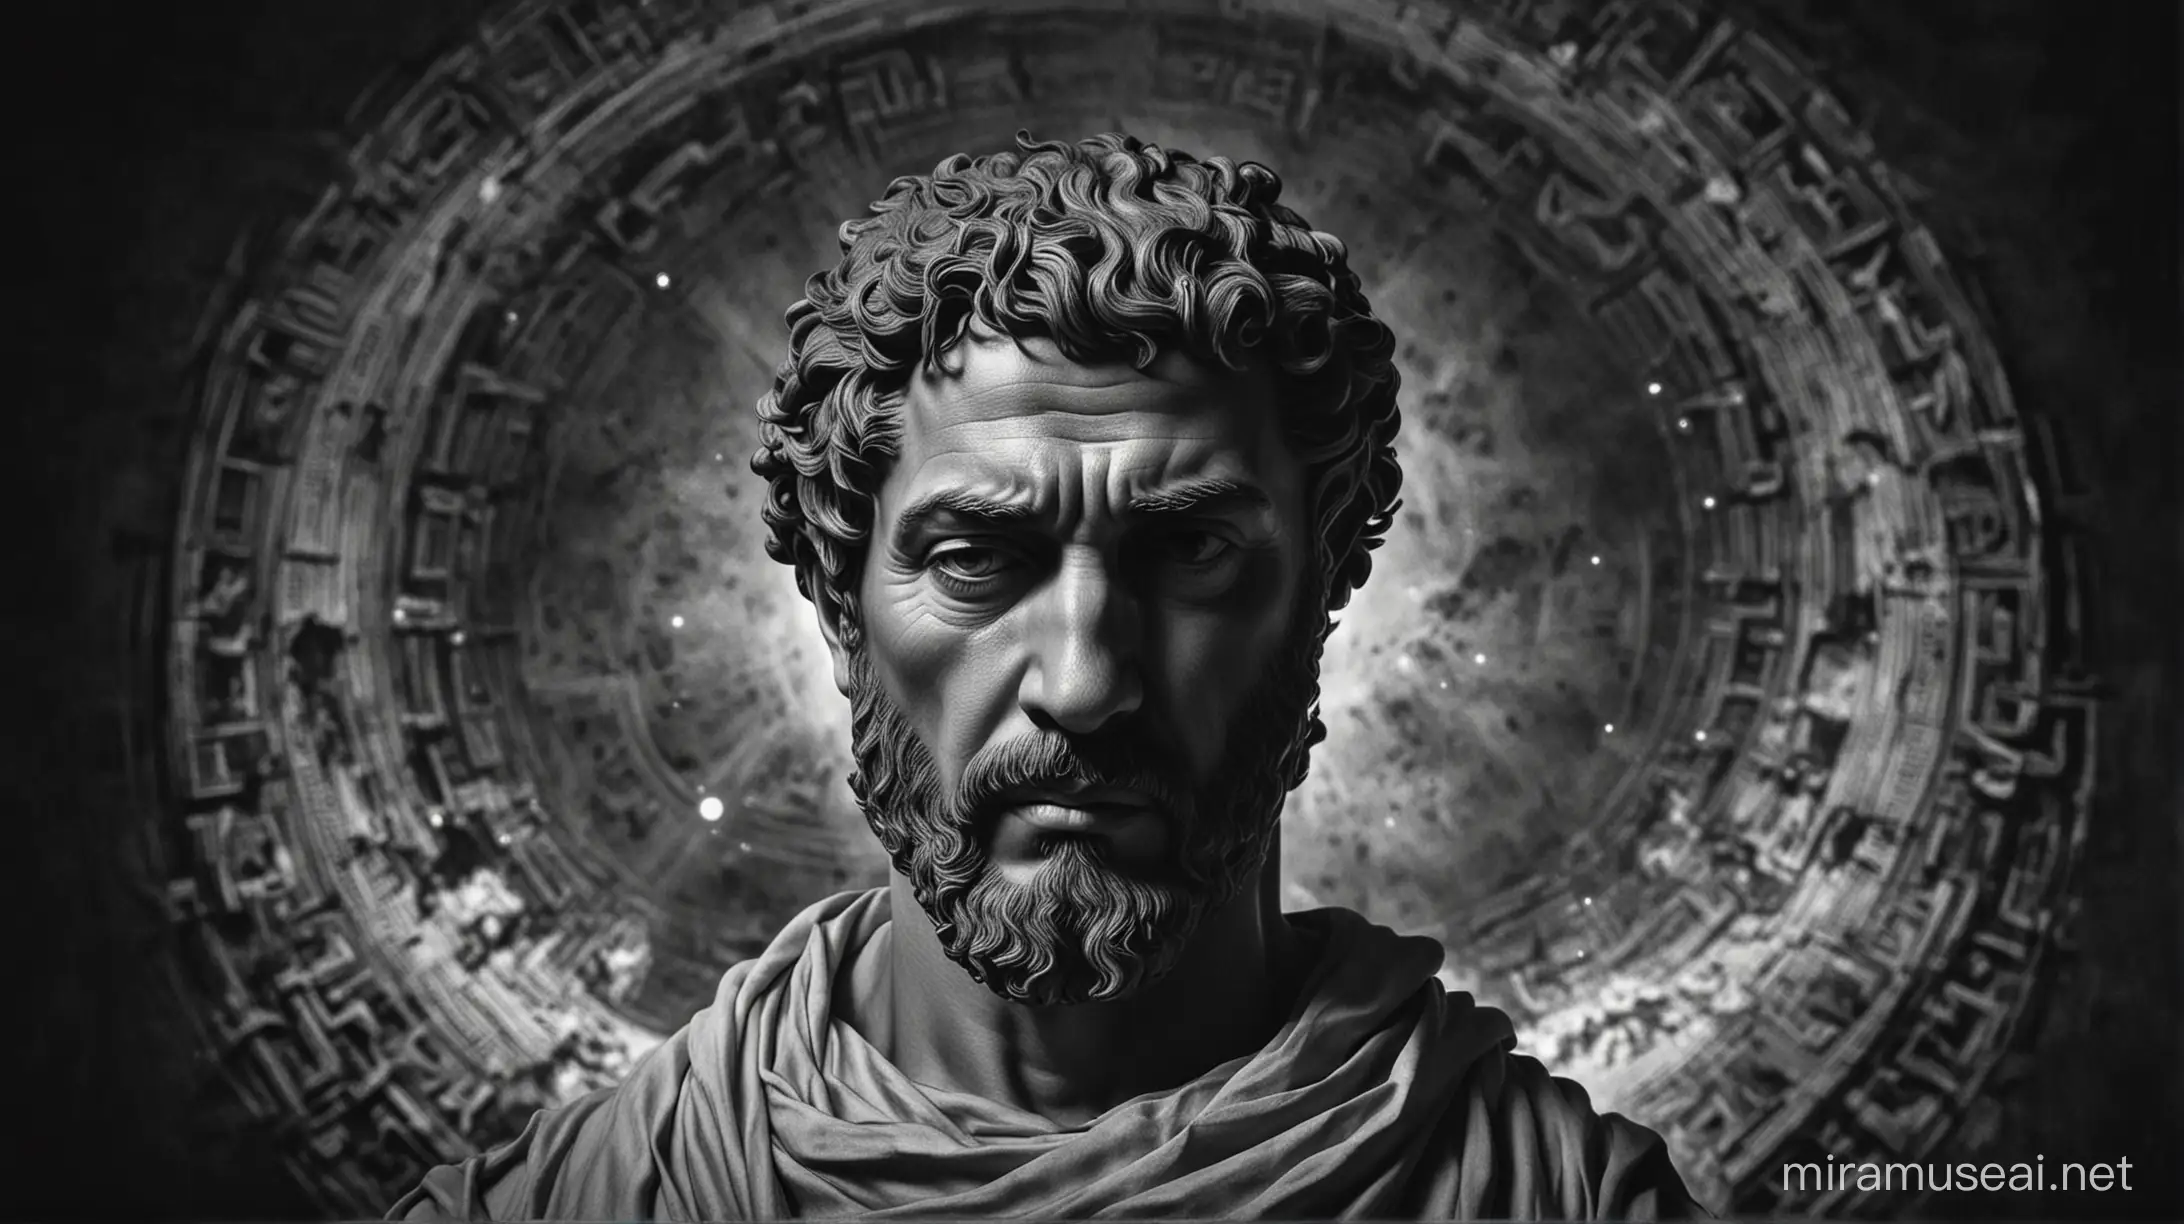 A full photo of a powerful stoic man looking calm at the center of the image looking down. The bg should be dark and clear. The image should be black and white and must look philosophical